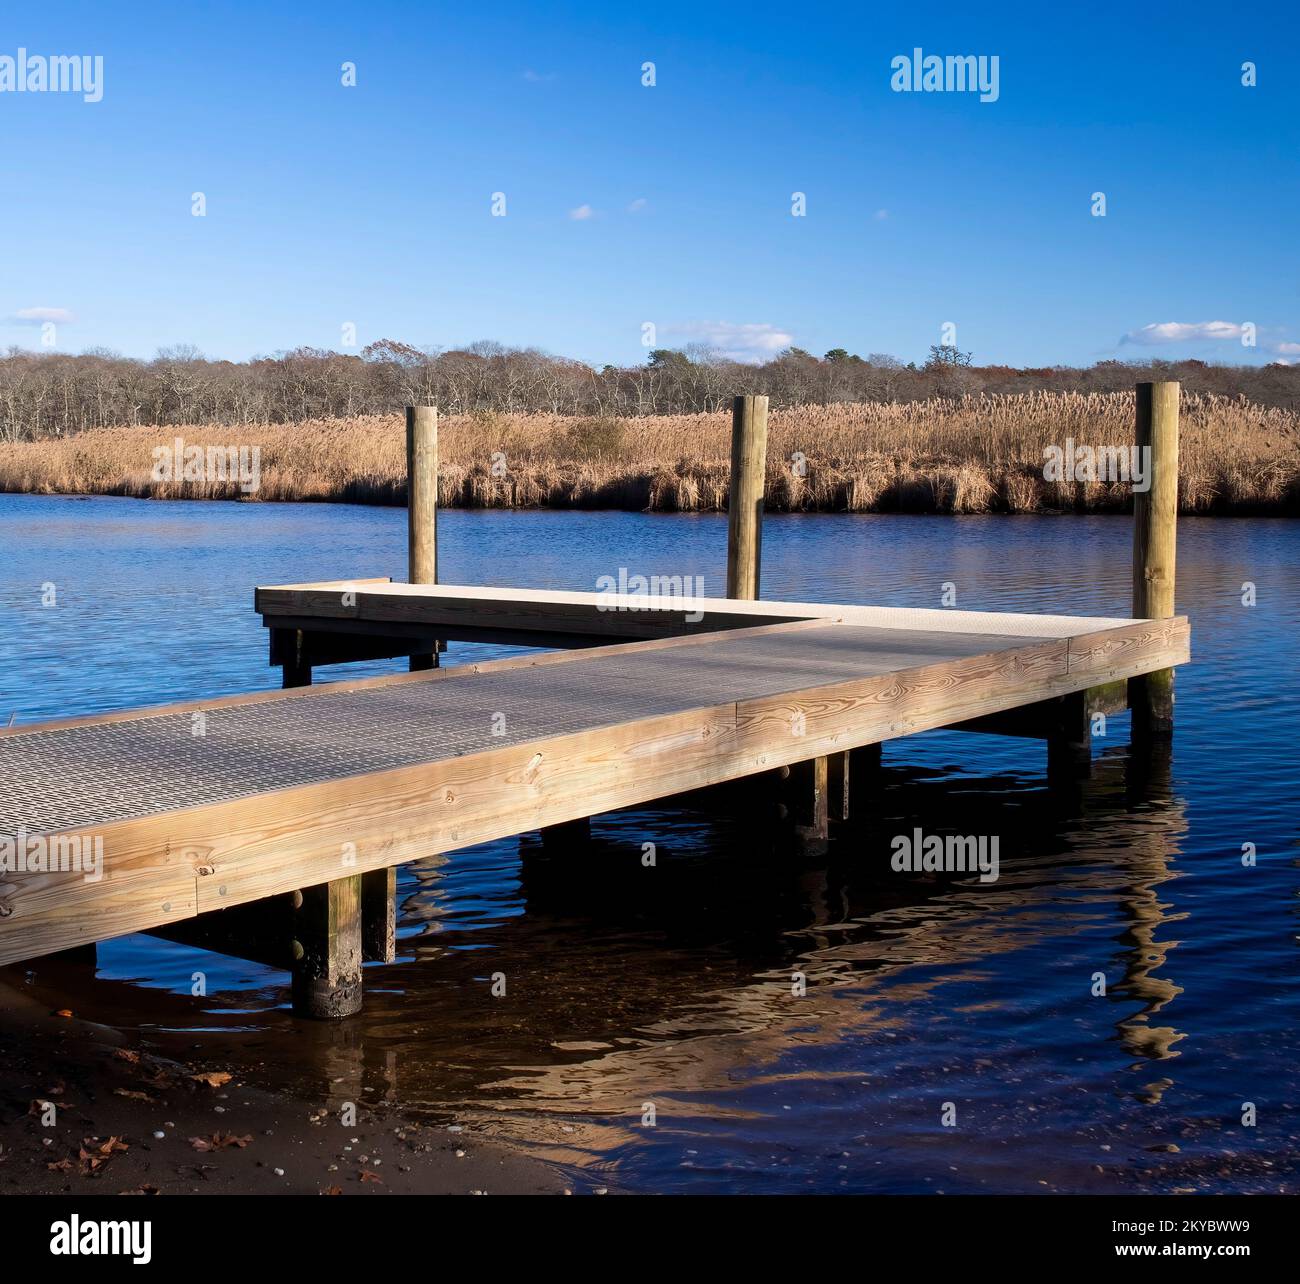 Wertheim National Wildlife Refuge, Long Island, New York. Wood dock on Carmans River, blue sky. Habitats of the refuge are a haven for wildlife, birds. Stock Photo